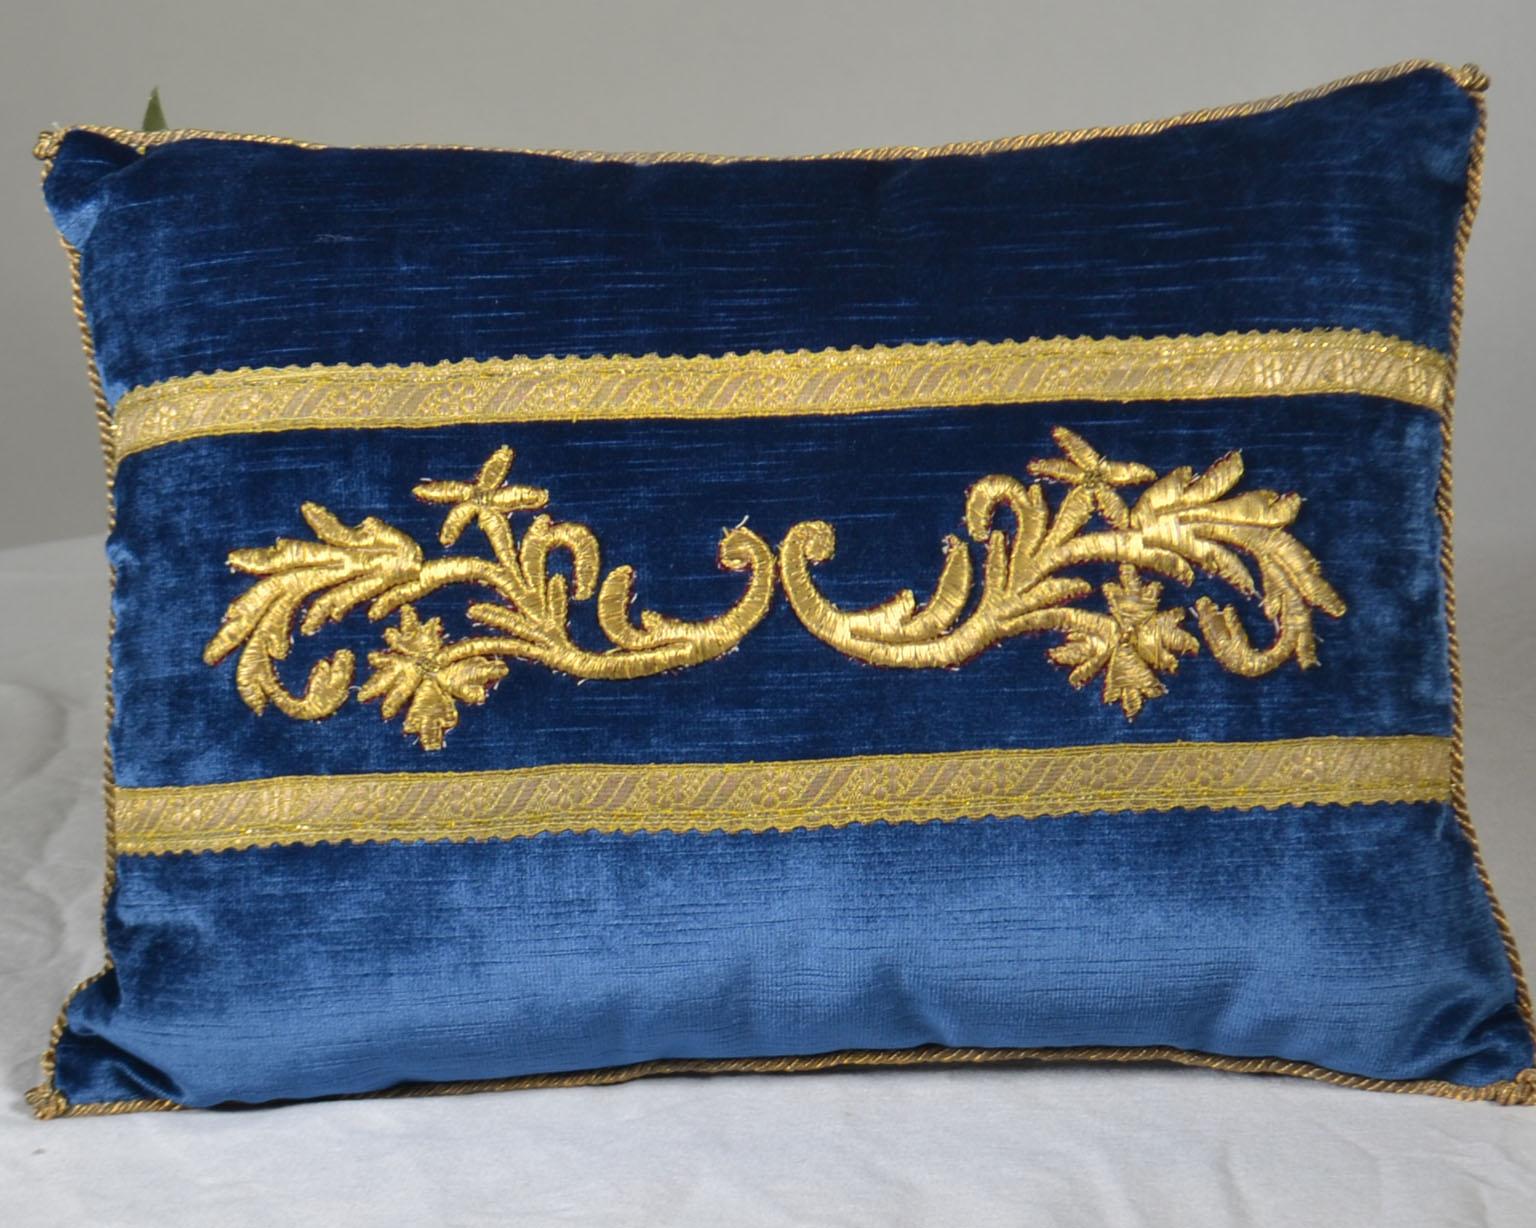 Antique Ottoman Empire raised gold metallic embroidery bordered with gold metallic on midnight blue velvet. Hand trimmed with vintage gold metallic cording knotted in the corners. Down filled. Size: 11